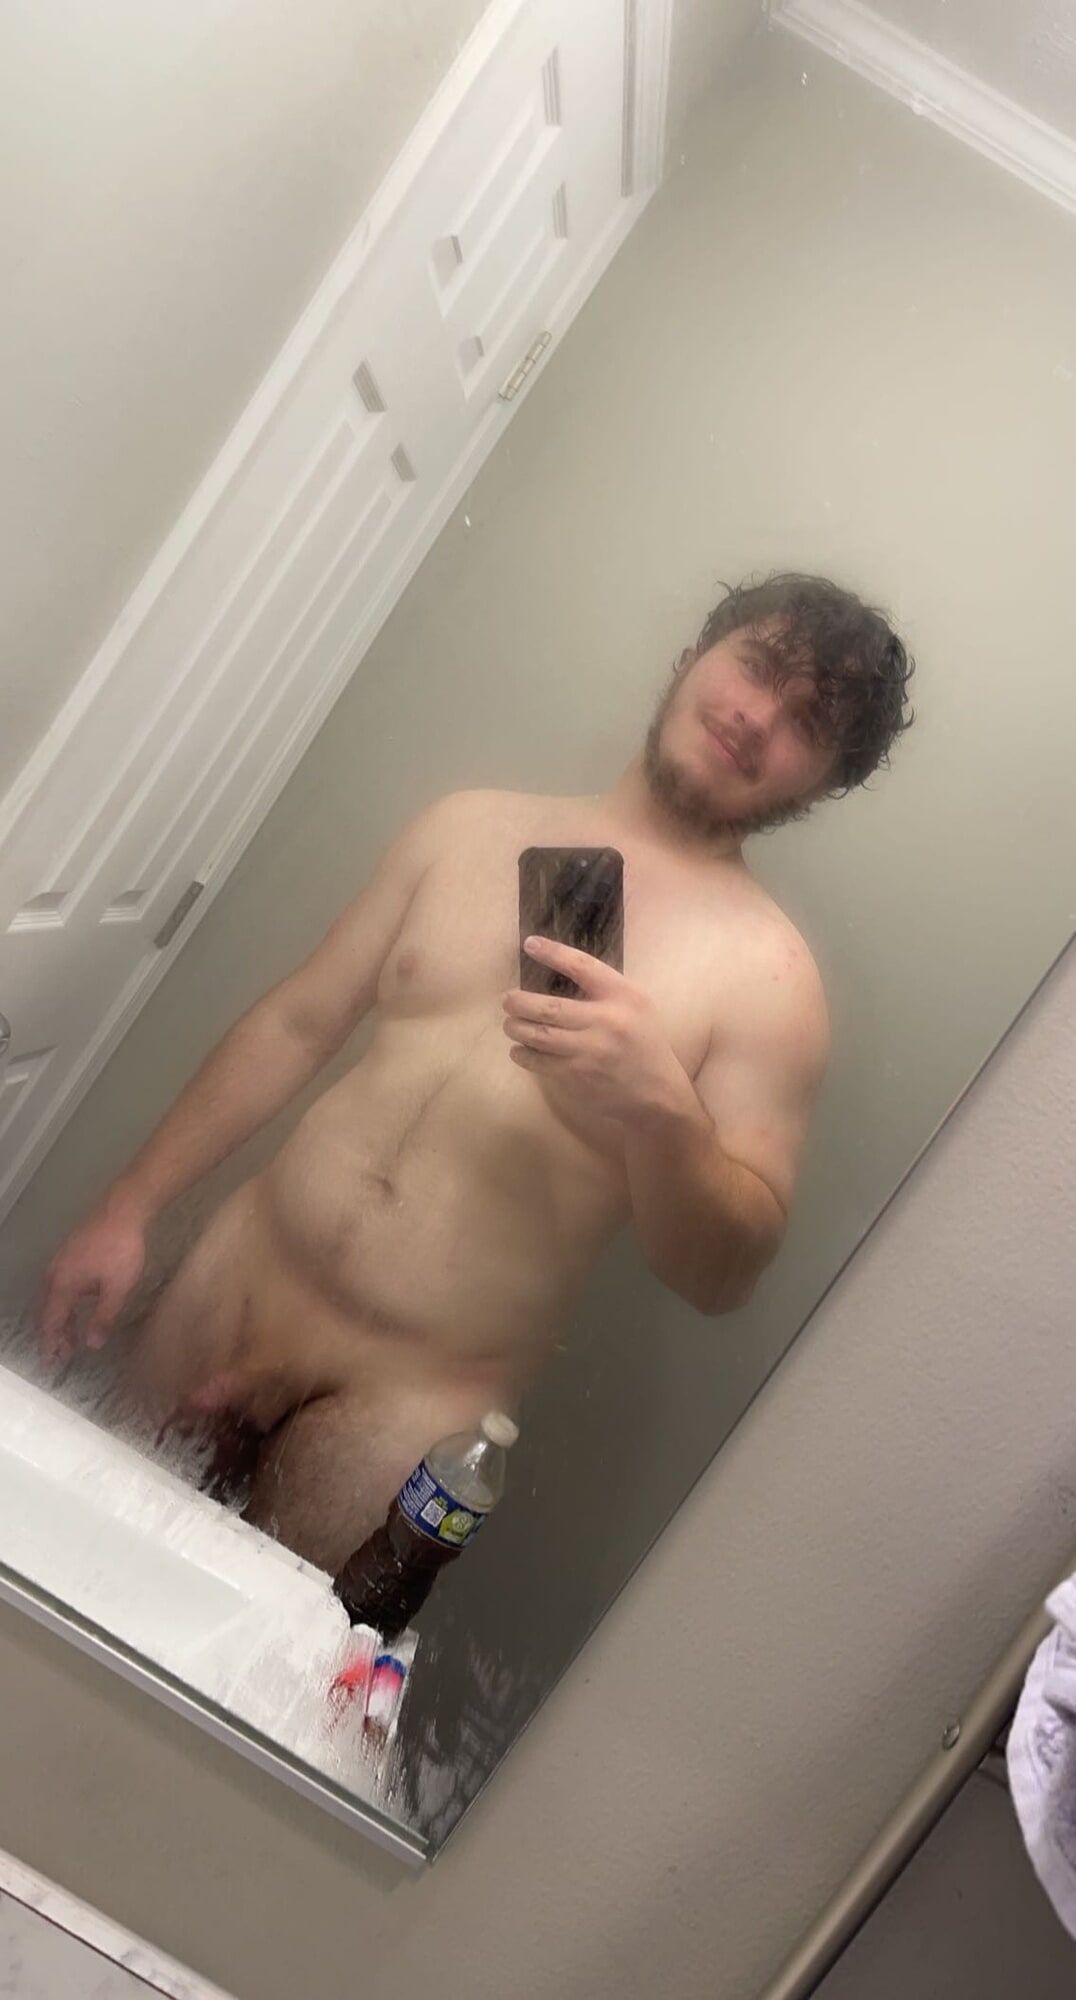 Who’s pussy wants my cock? I want to fuck your pussy so hard